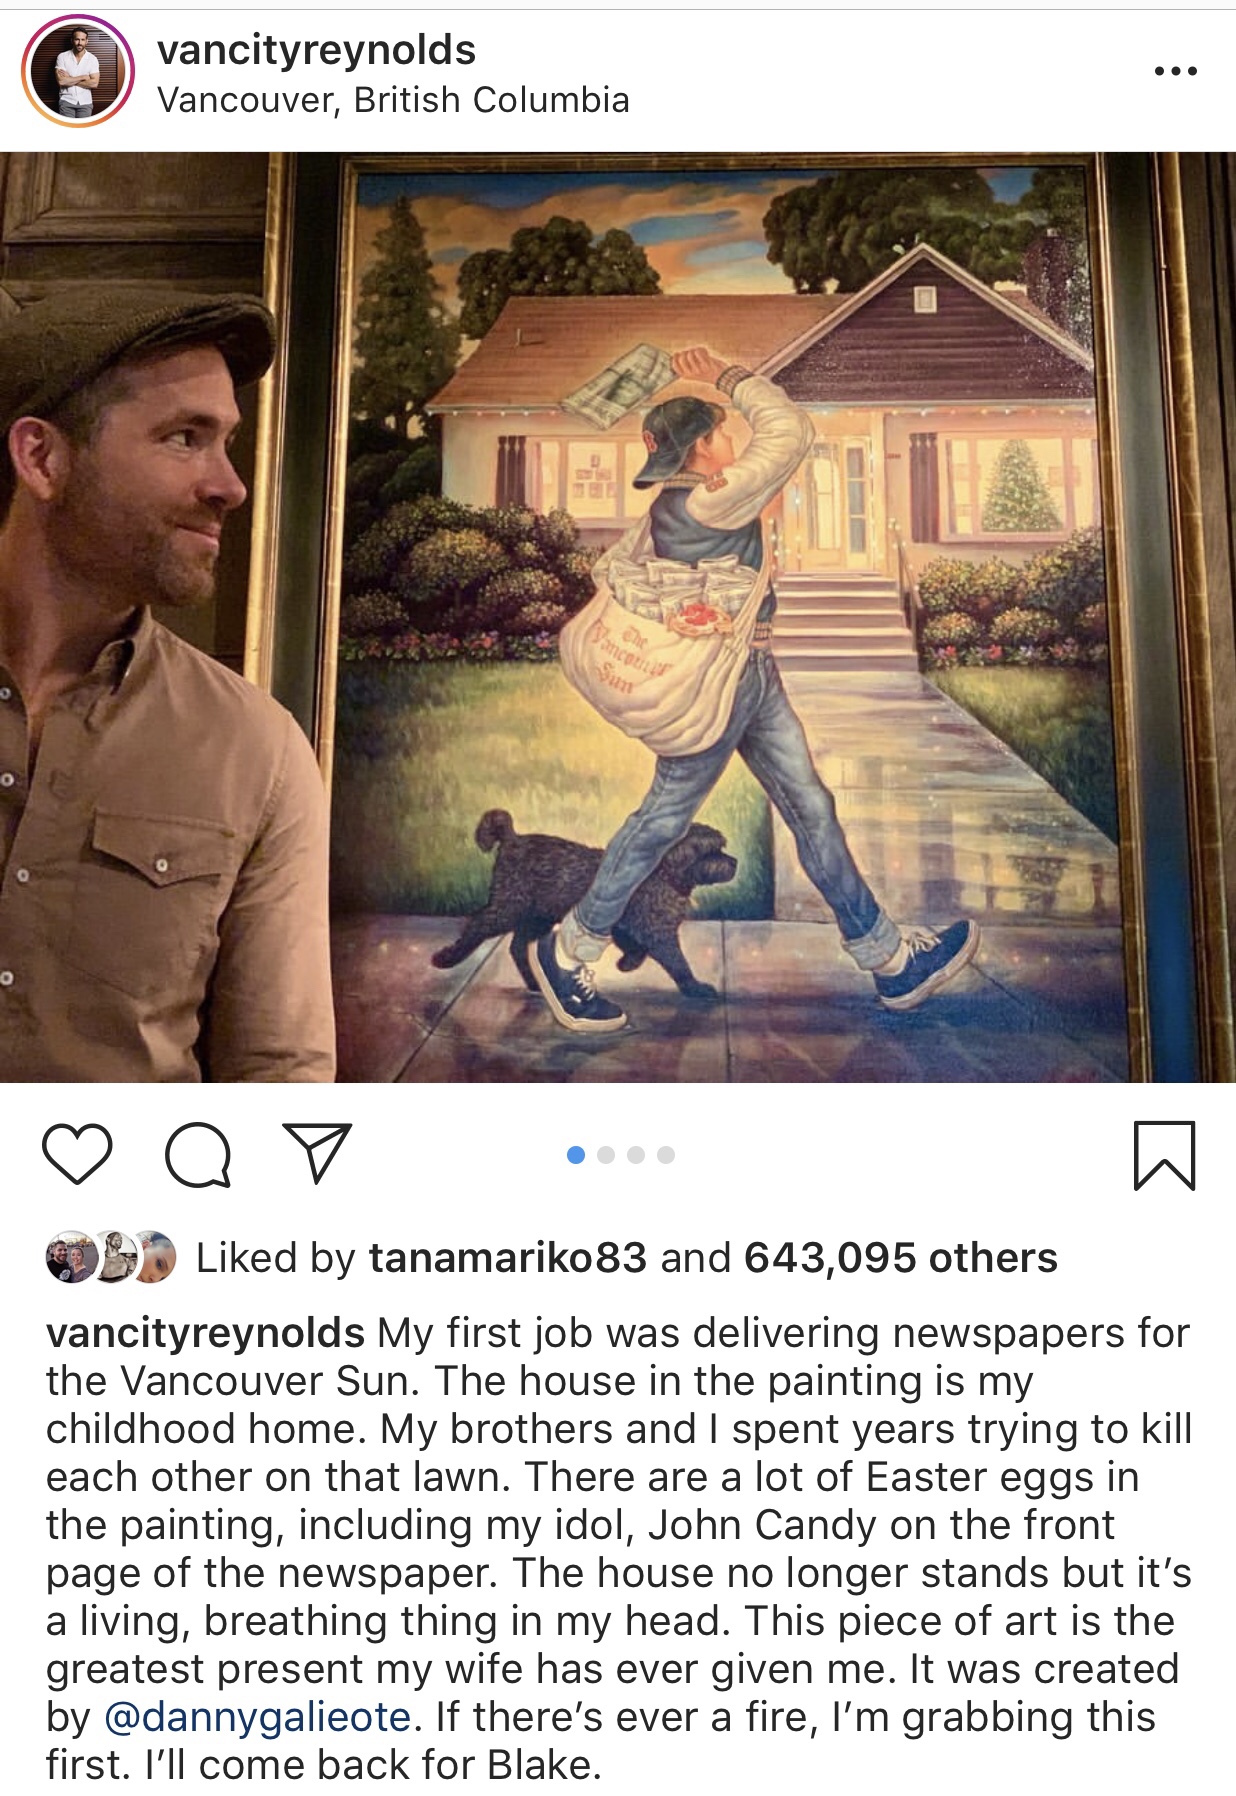 poster - vancityreynolds Vancouver, British Columbia Os d by tanamariko83 and 643,095 others vancityreynolds My first job was delivering newspapers for the Vancouver Sun. The house in the painting is my childhood home. My brothers and spent years trying t